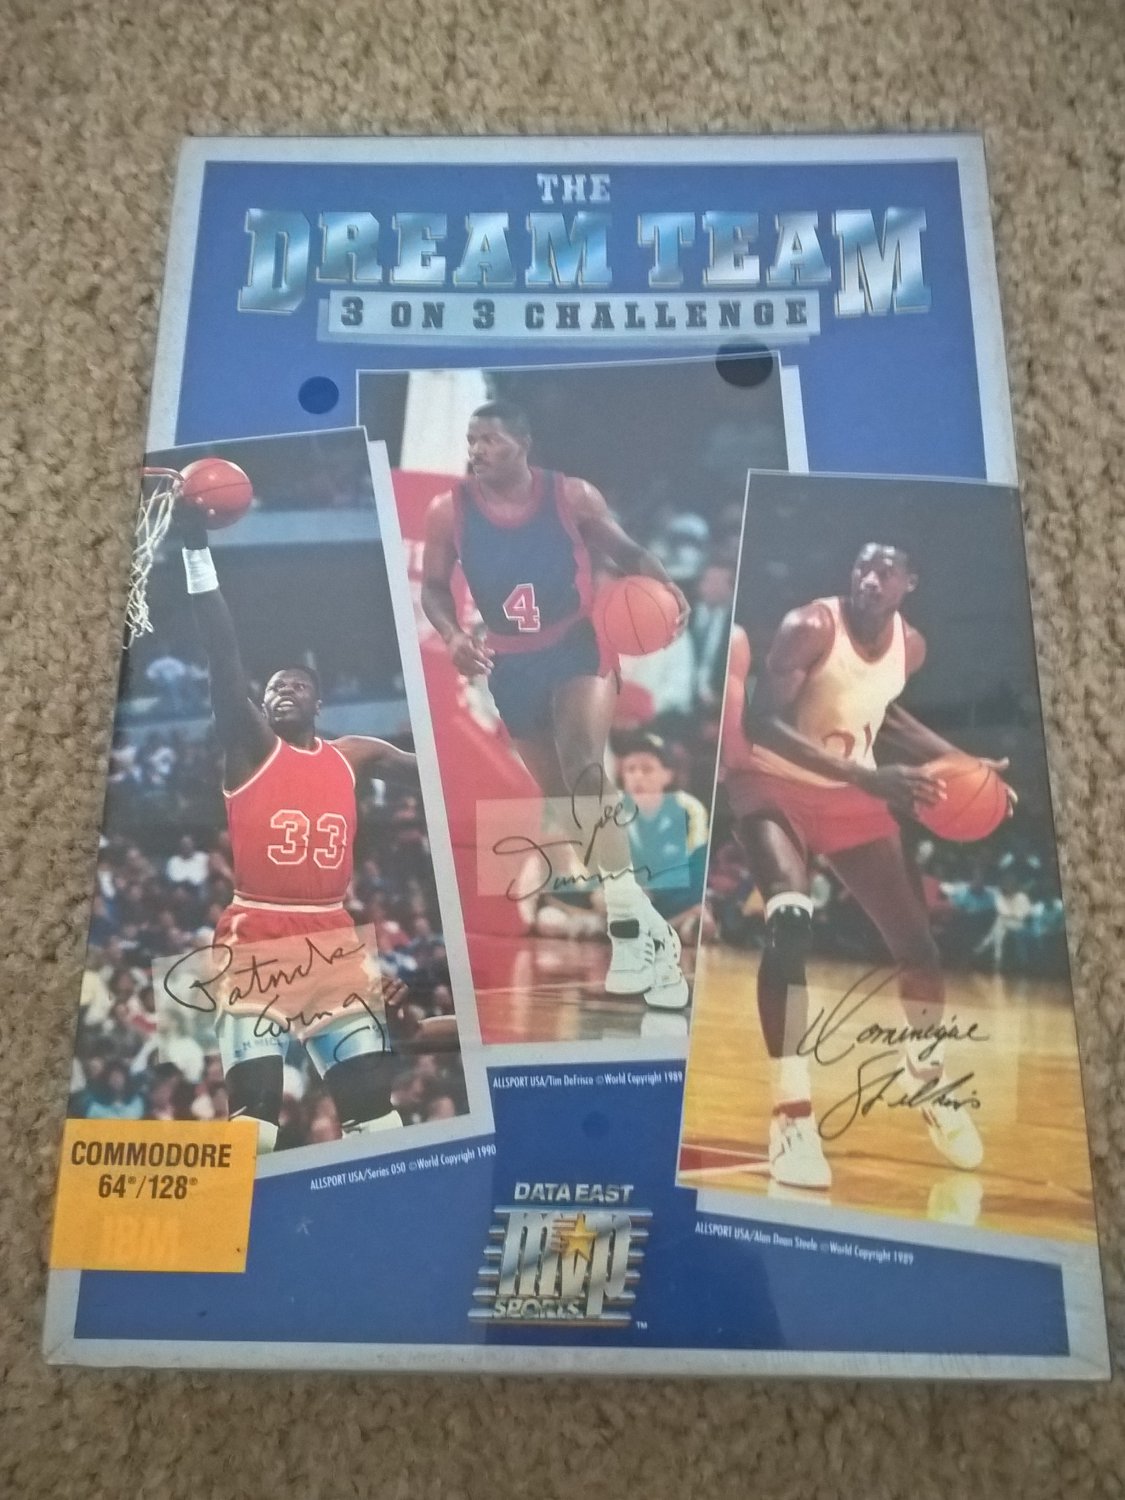 The Dream Team: 3 On 3 For Commodore 64/128, NEW FACTORY SEALED, DataEast